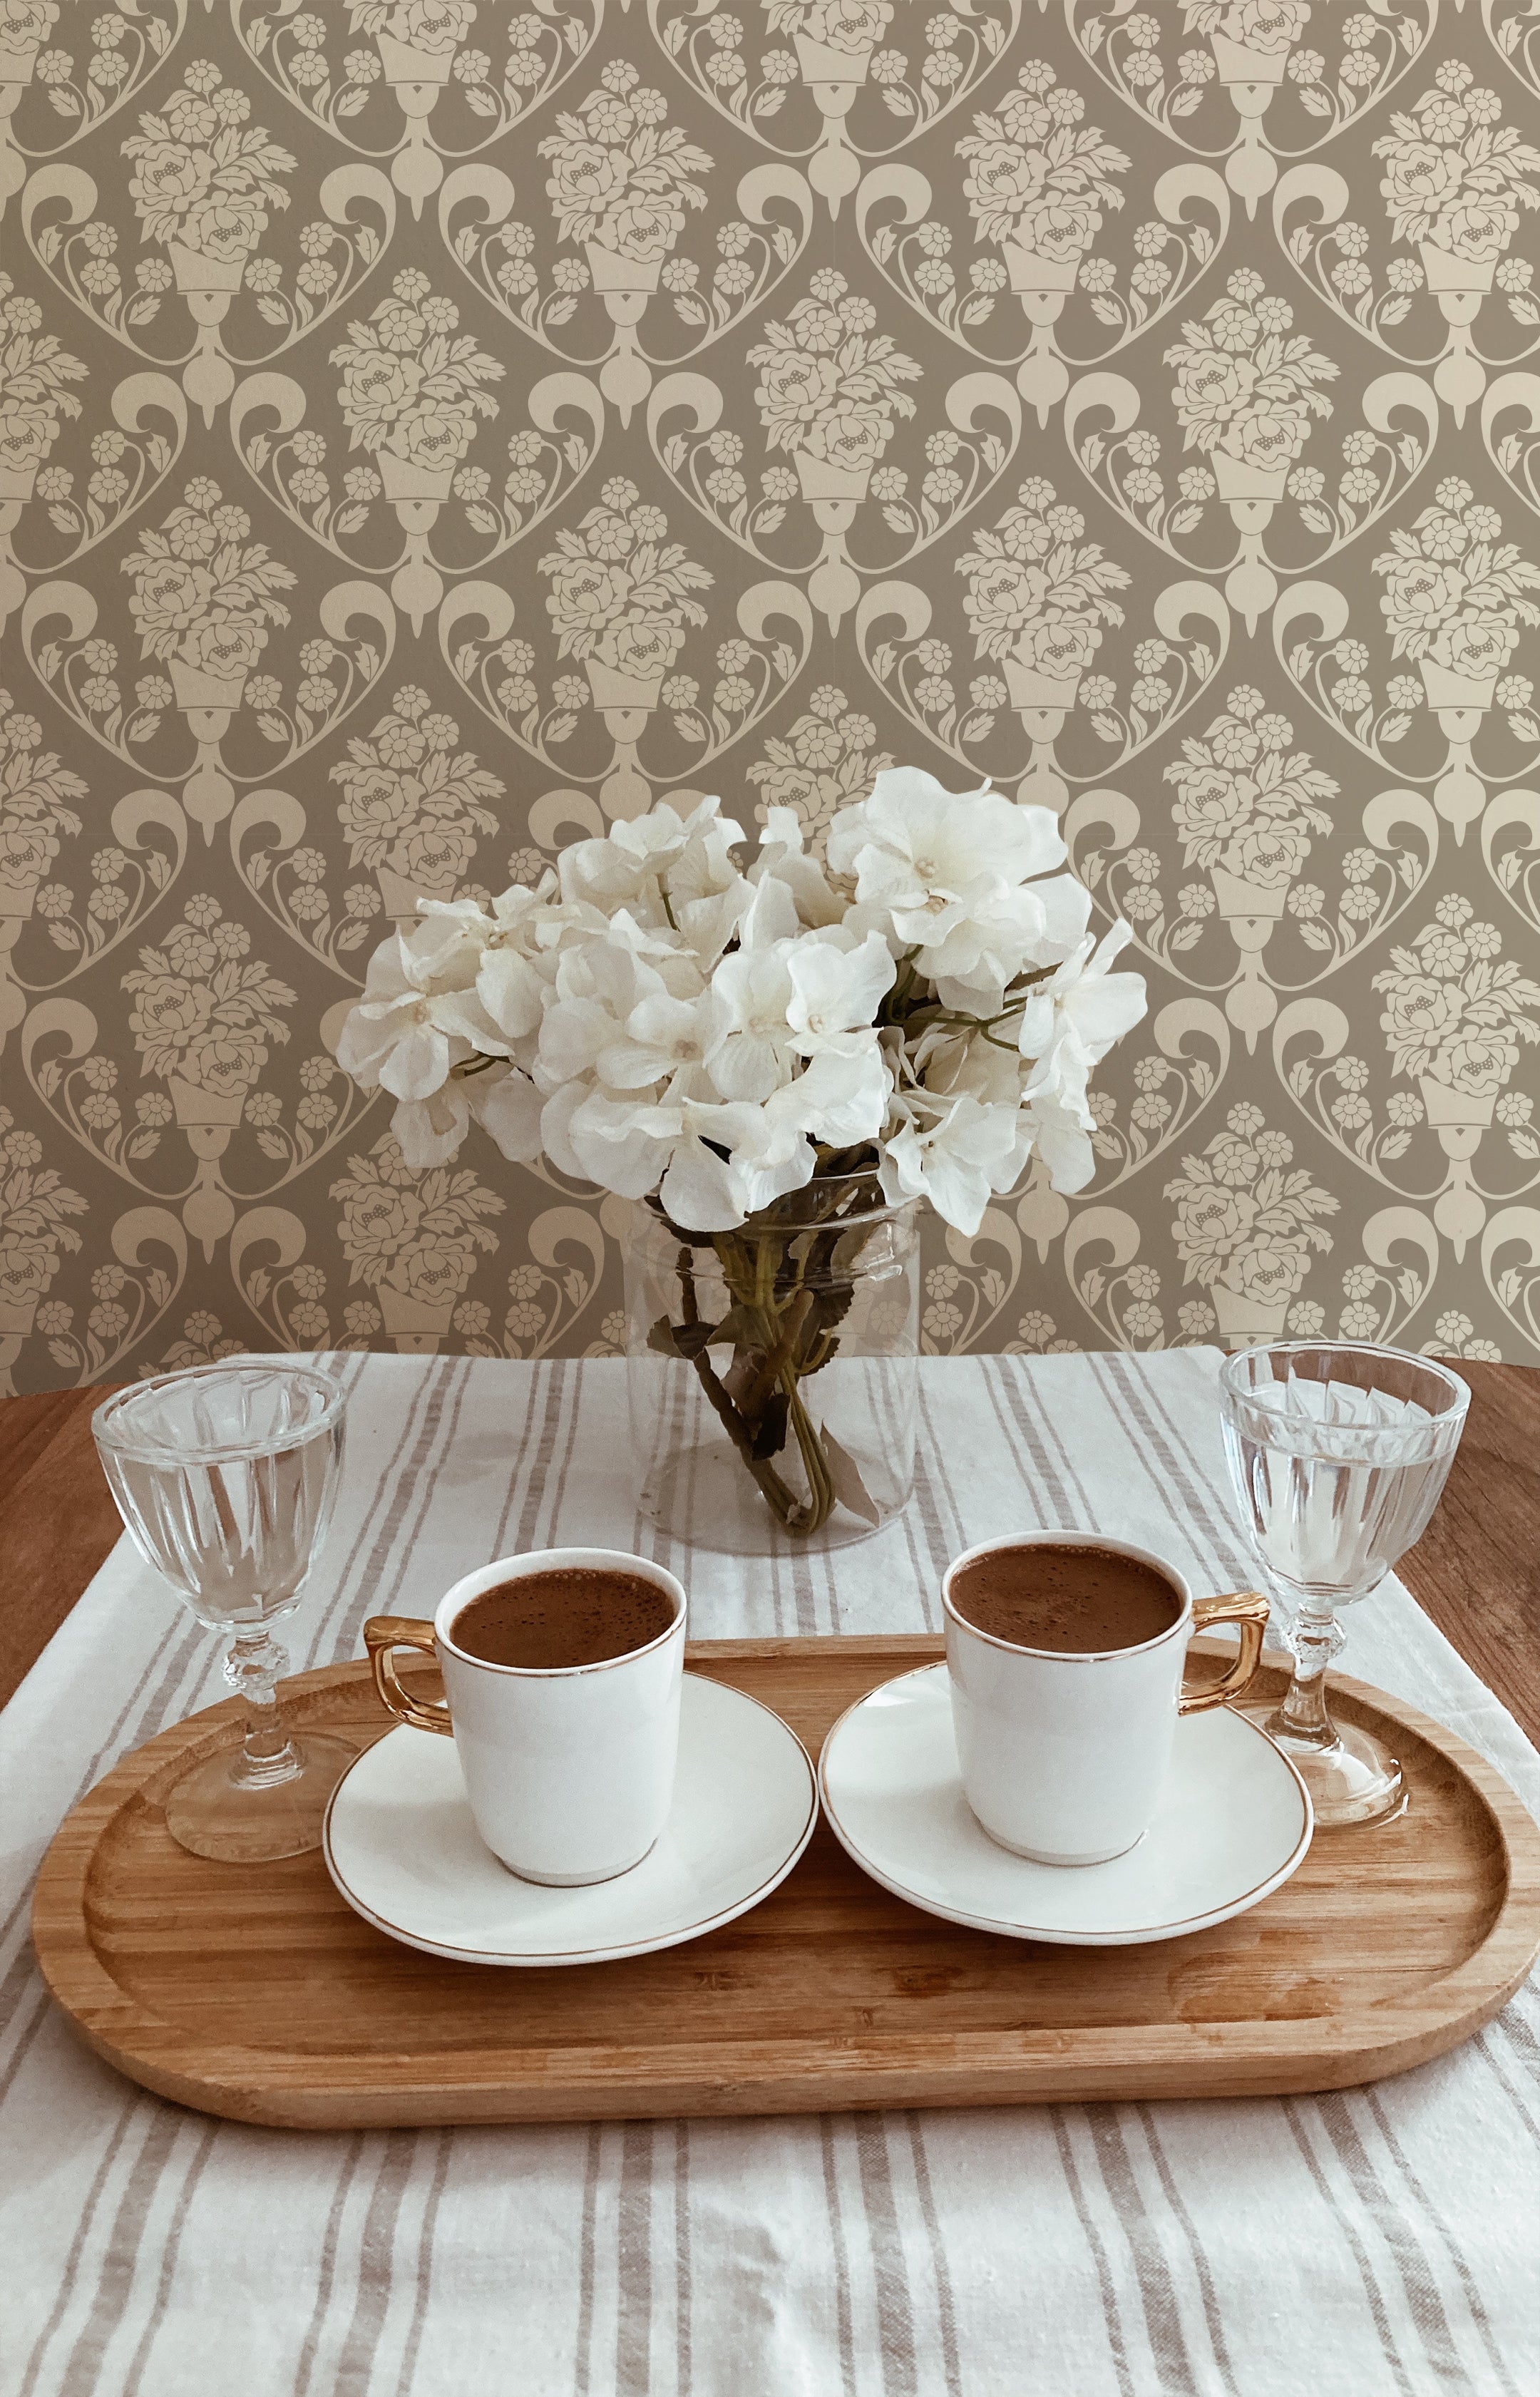 A quaint coffee table setting with two white coffee cups on a wooden tray, placed in front of a wall covered with Victorian Bloom wallpaper. The wallpaper's beige floral pattern complements the fresh white flowers in a glass vase, creating a serene and inviting atmosphere.